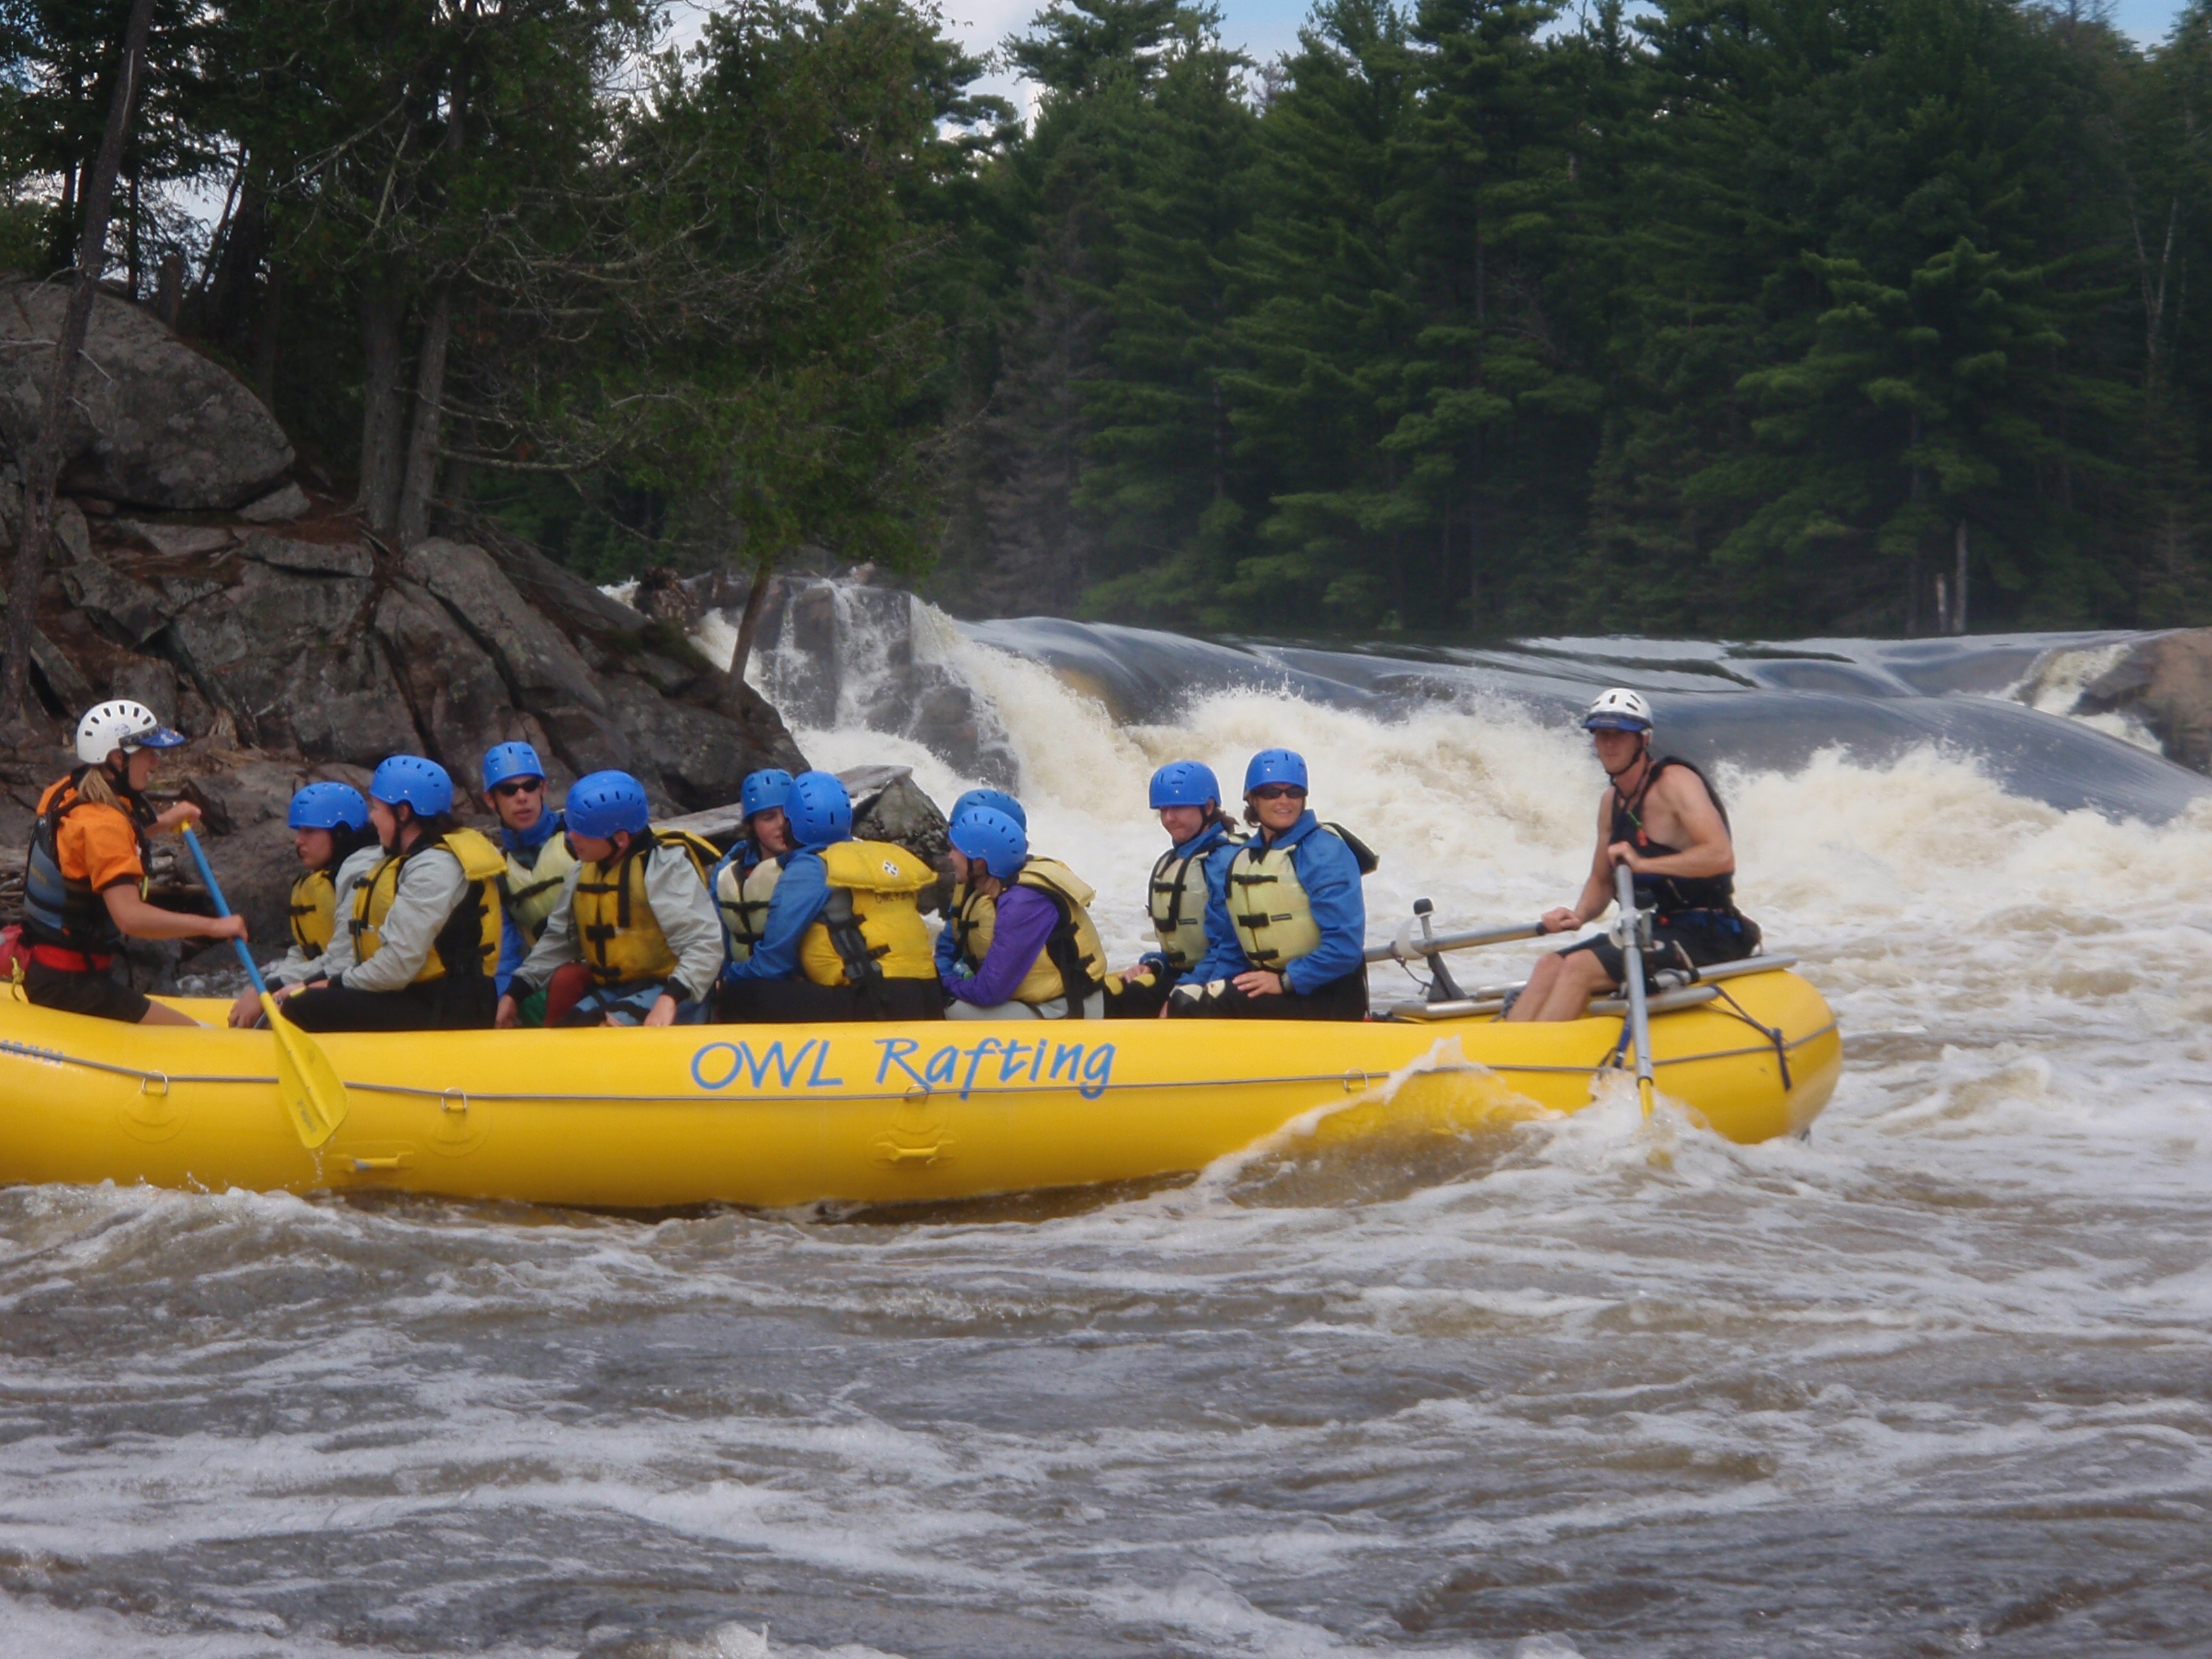 White water rafting on the Ottawa River with Owl Rafting.